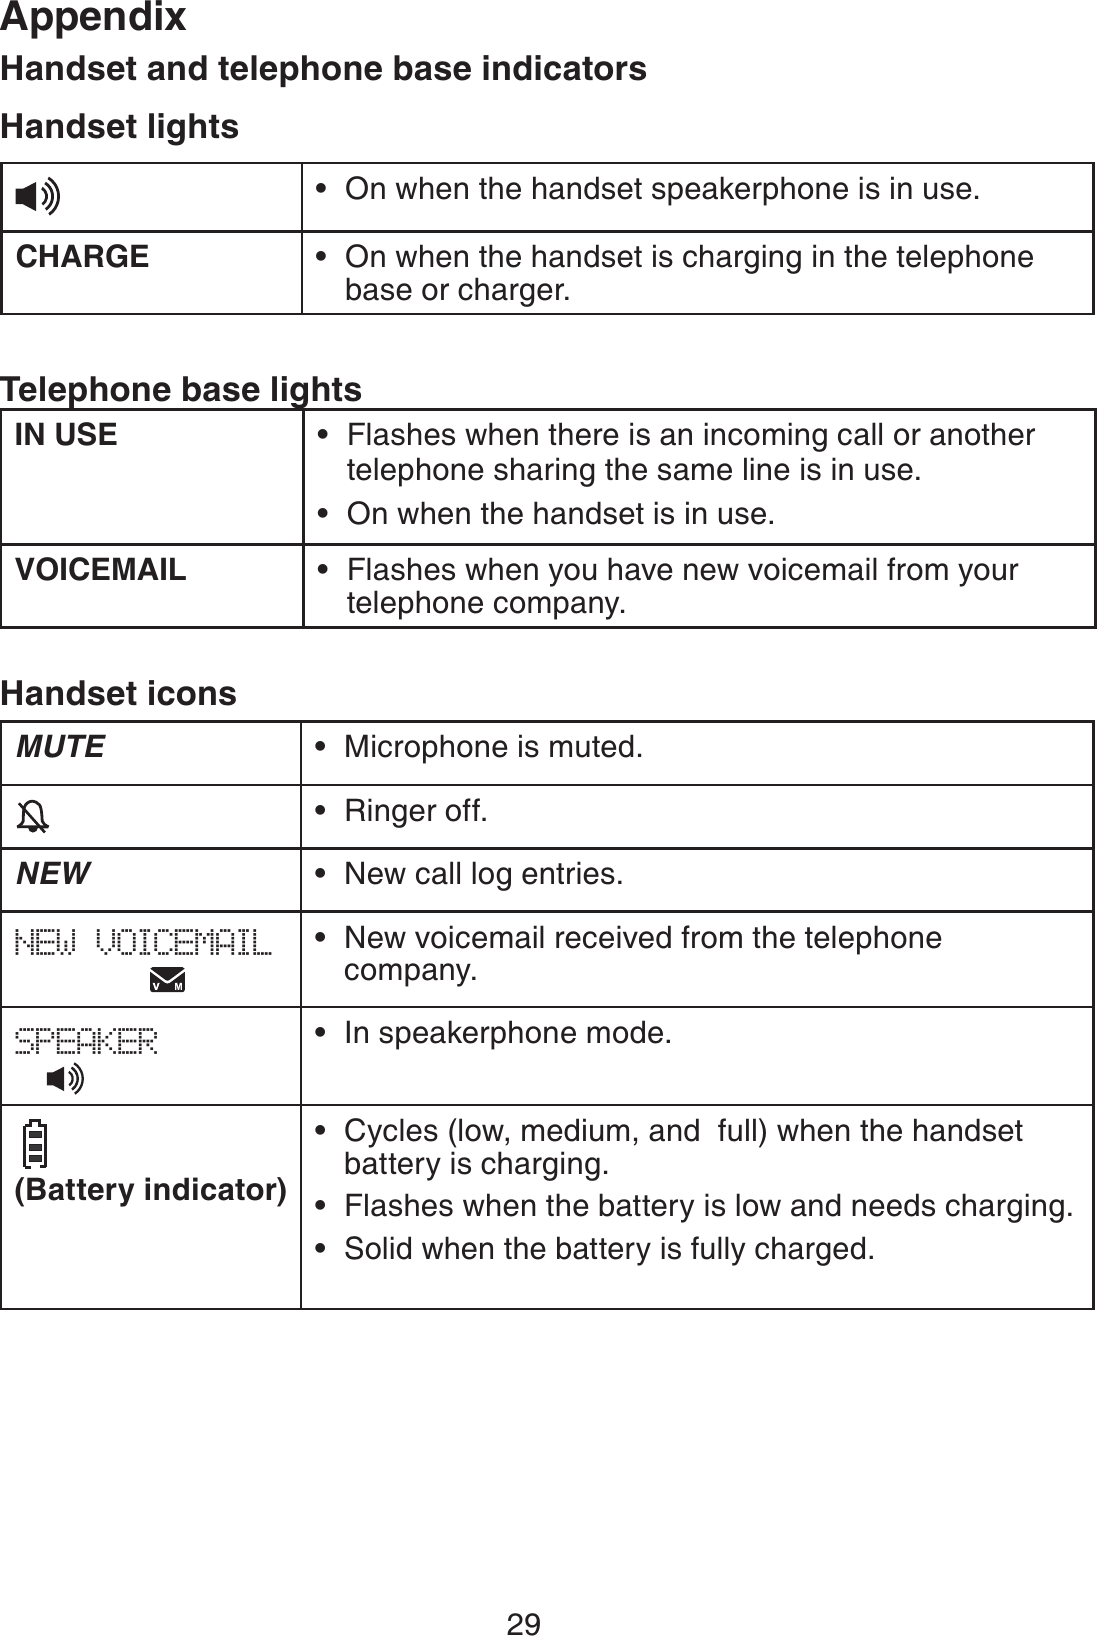 29AppendixHandset and telephone base indicatorsHandset lightsOn when the handset speakerphone is in use.•CHARGE On when the handset is charging in the telephone base or charger.•Telephone base lightsIN USE Flashes when there is an incoming call or another telephone sharing the same line is in use.On when the handset is in use.••VOICEMAIL Flashes when you have new voicemail from your telephone company.•MUTE Microphone is muted.•Ringer off.•NEW New call log entries.•NEW VOICEMAIL            New voicemail received from the telephone company.•SPEAKER  In speakerphone mode.•  (Battery indicator)                       Cycles (low, medium, and  full) when the handset battery is charging.Flashes when the battery is low and needs charging.Solid when the battery is fully charged.•••Handset icons